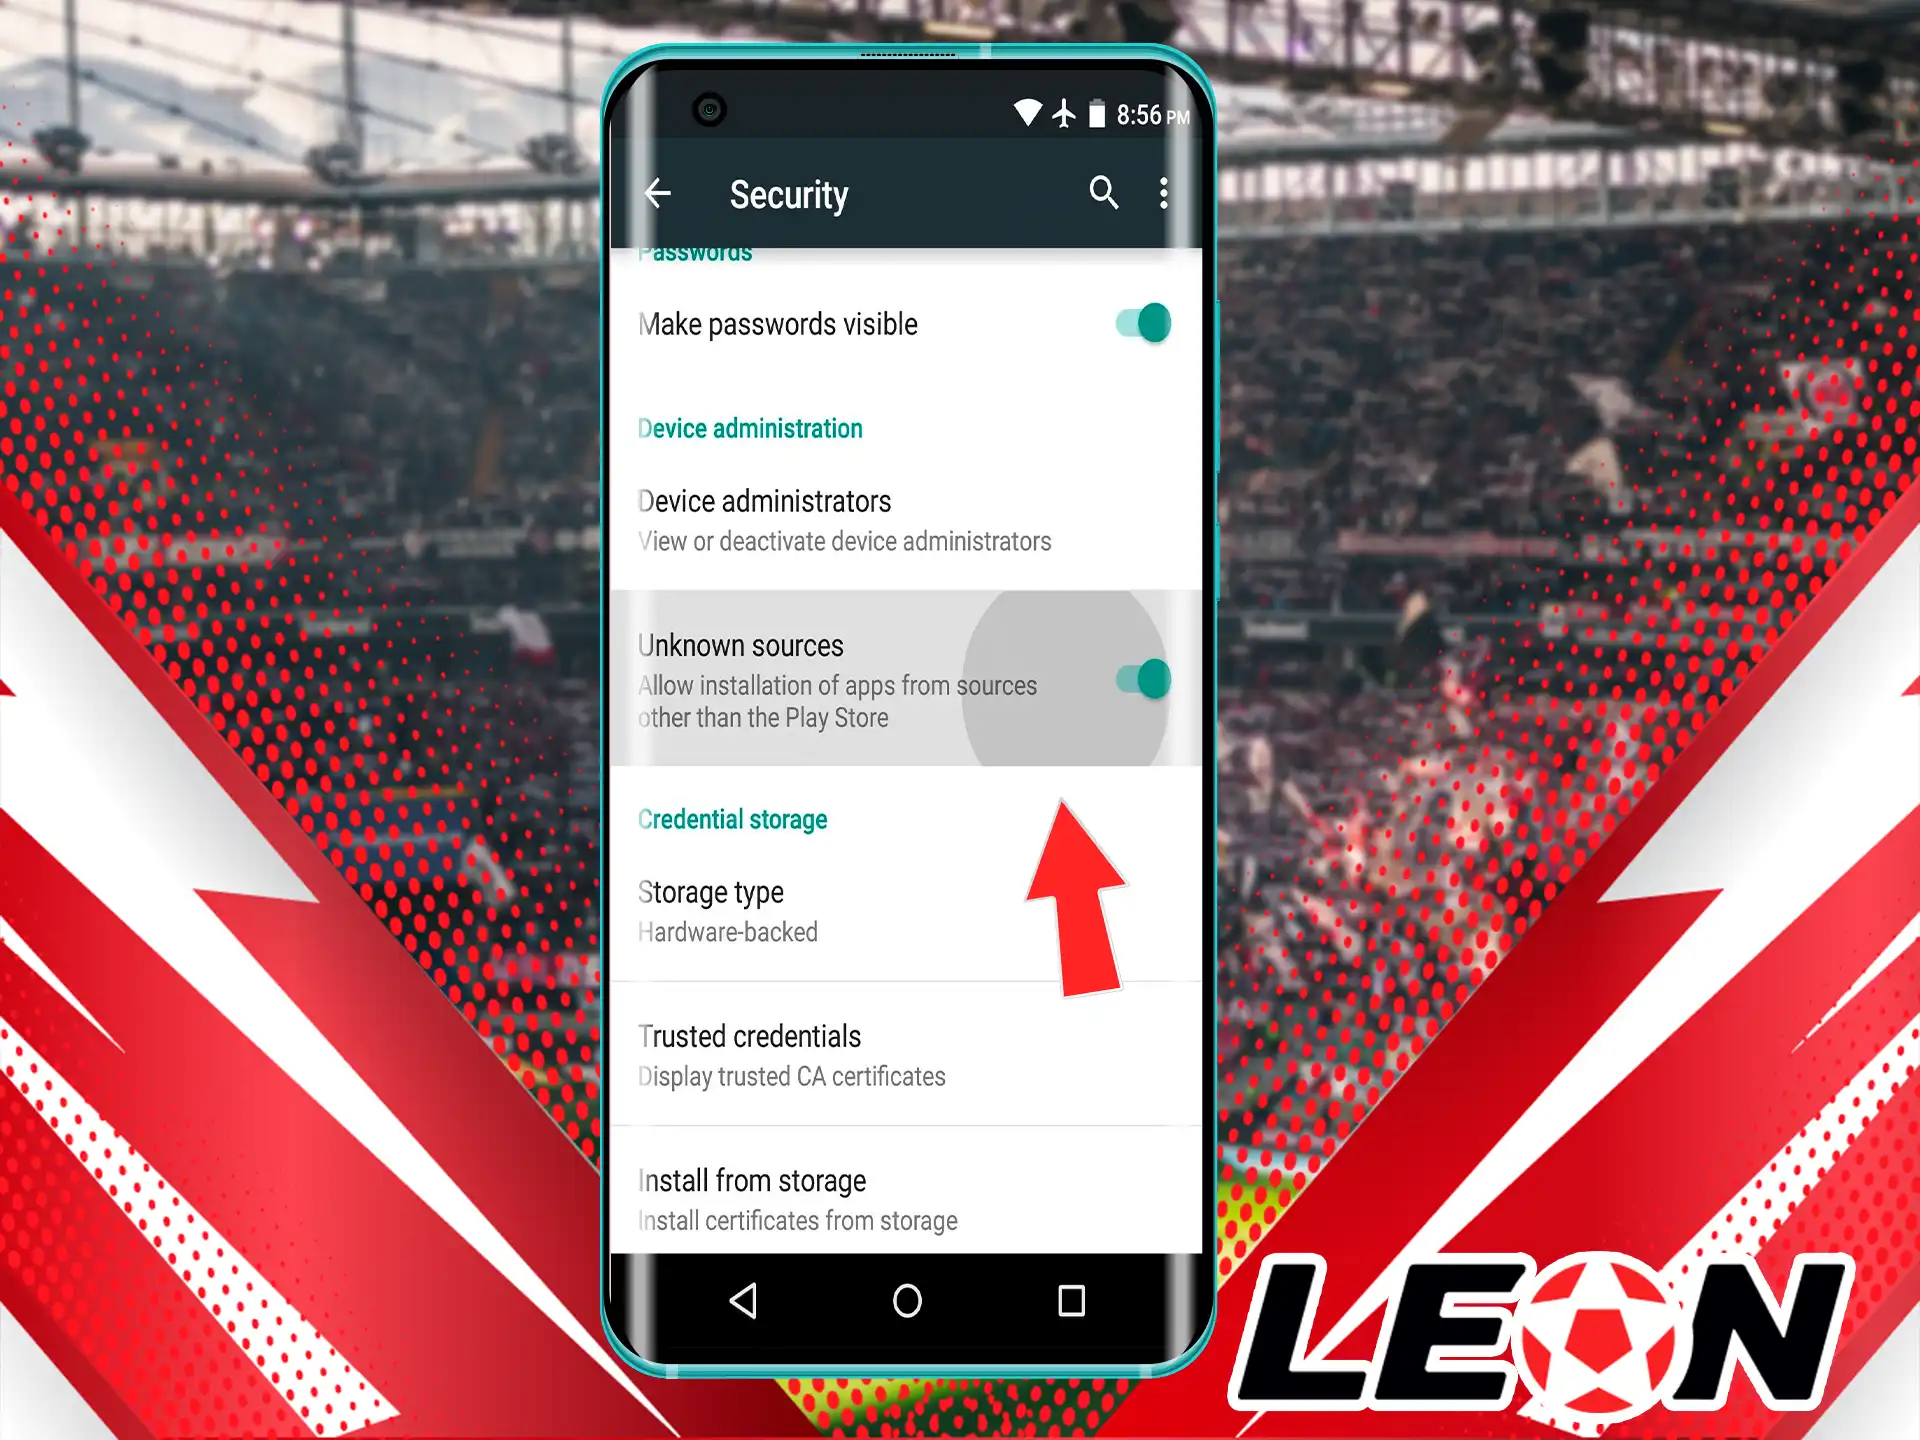 Next, allow your phone to install software not from the official Play Store, if you skip this step the Leon Bet App may not install correctly.